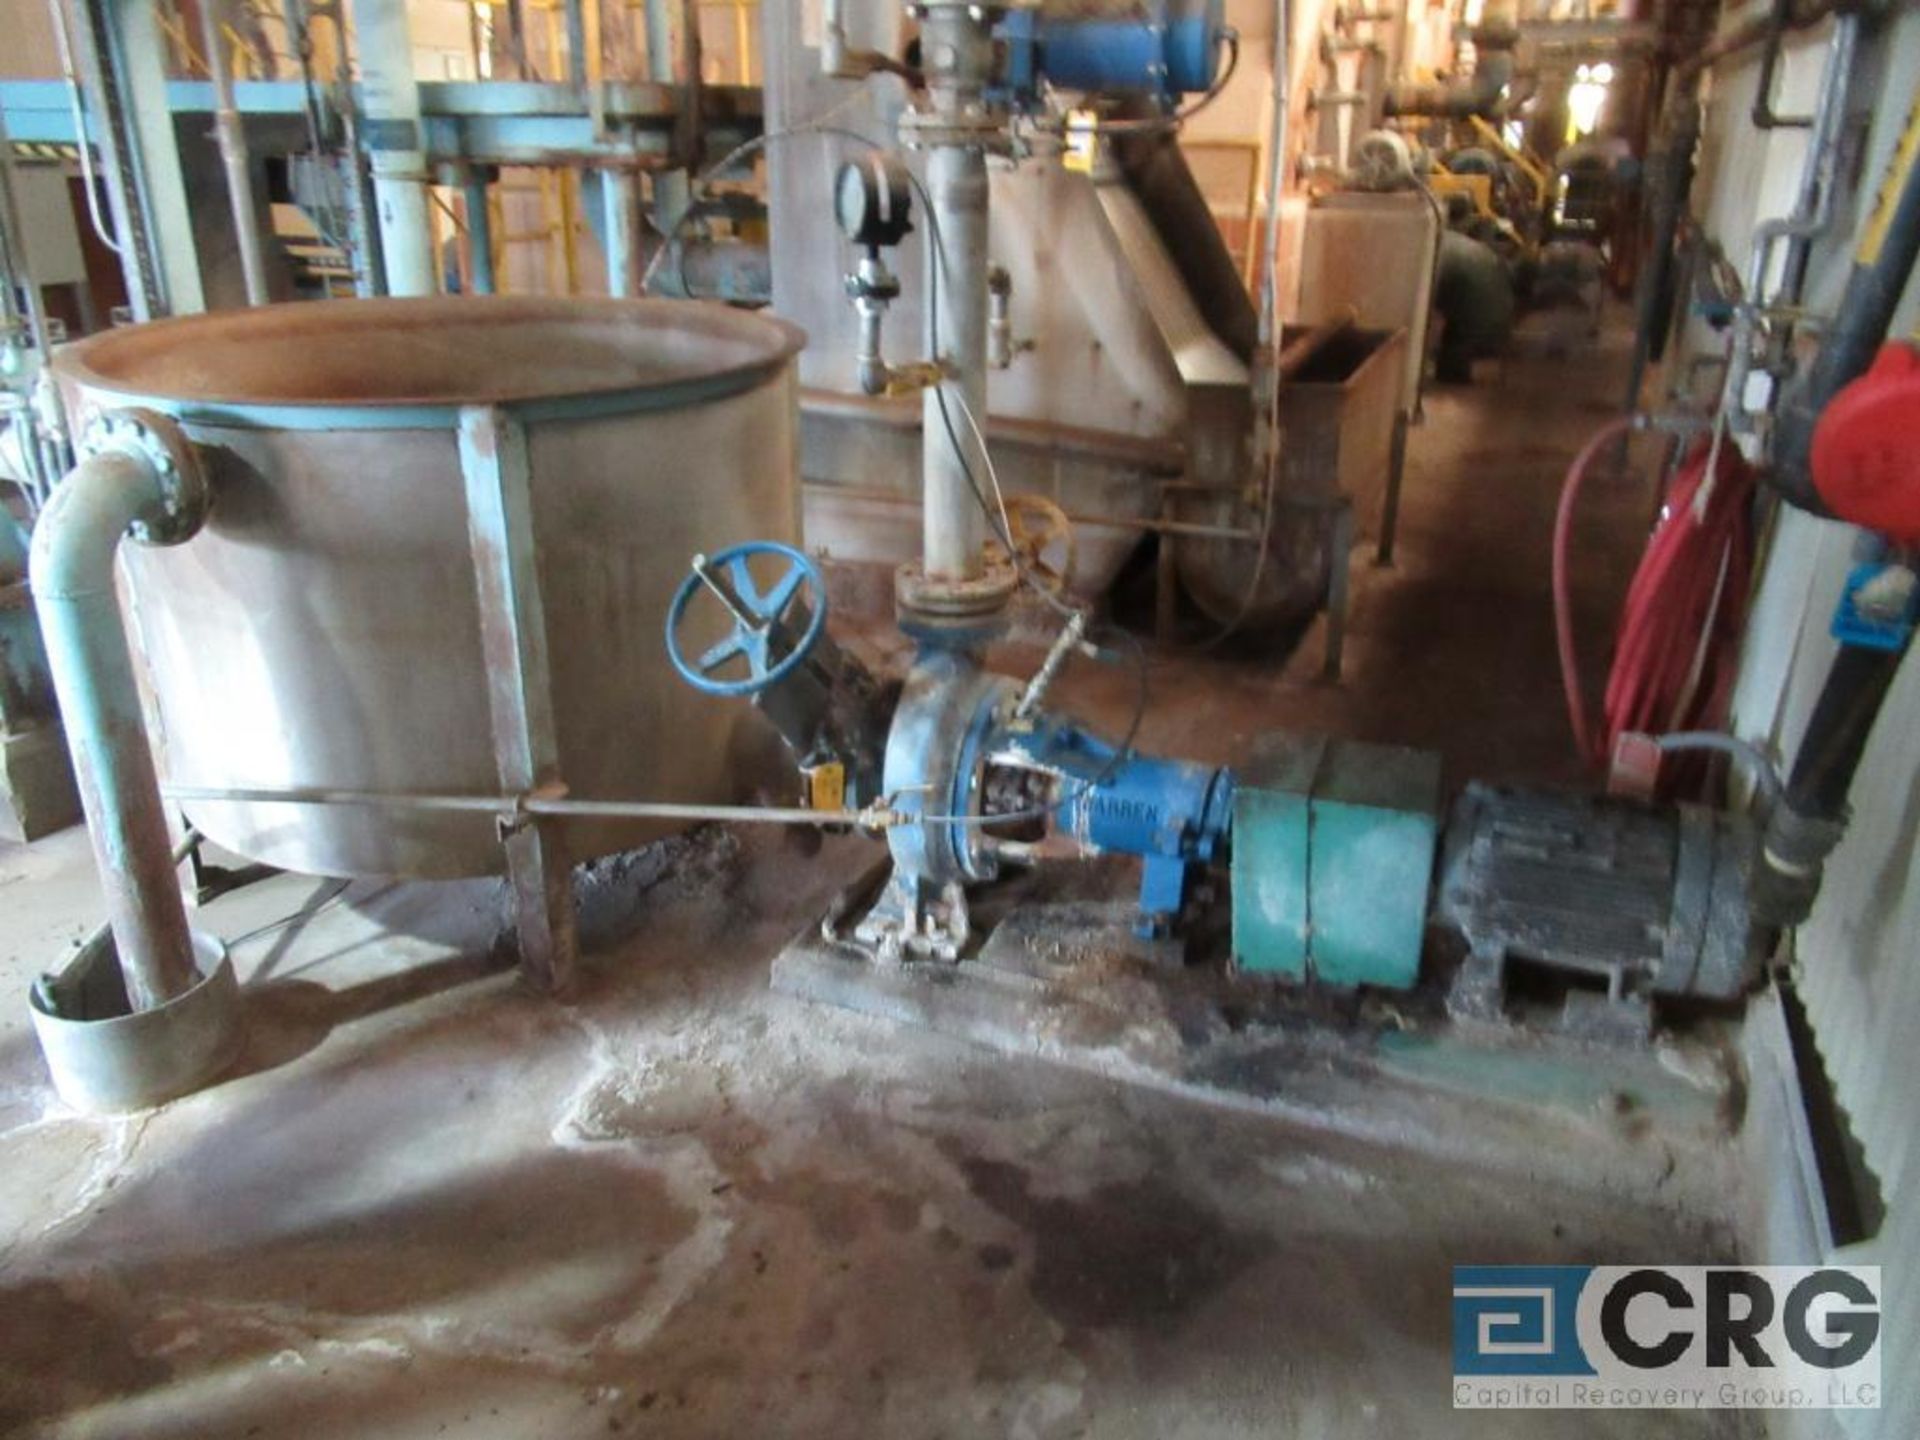 Warren ss centrifugal pump set with connecting ss surge tank (Elev 542 Pulp Mill)